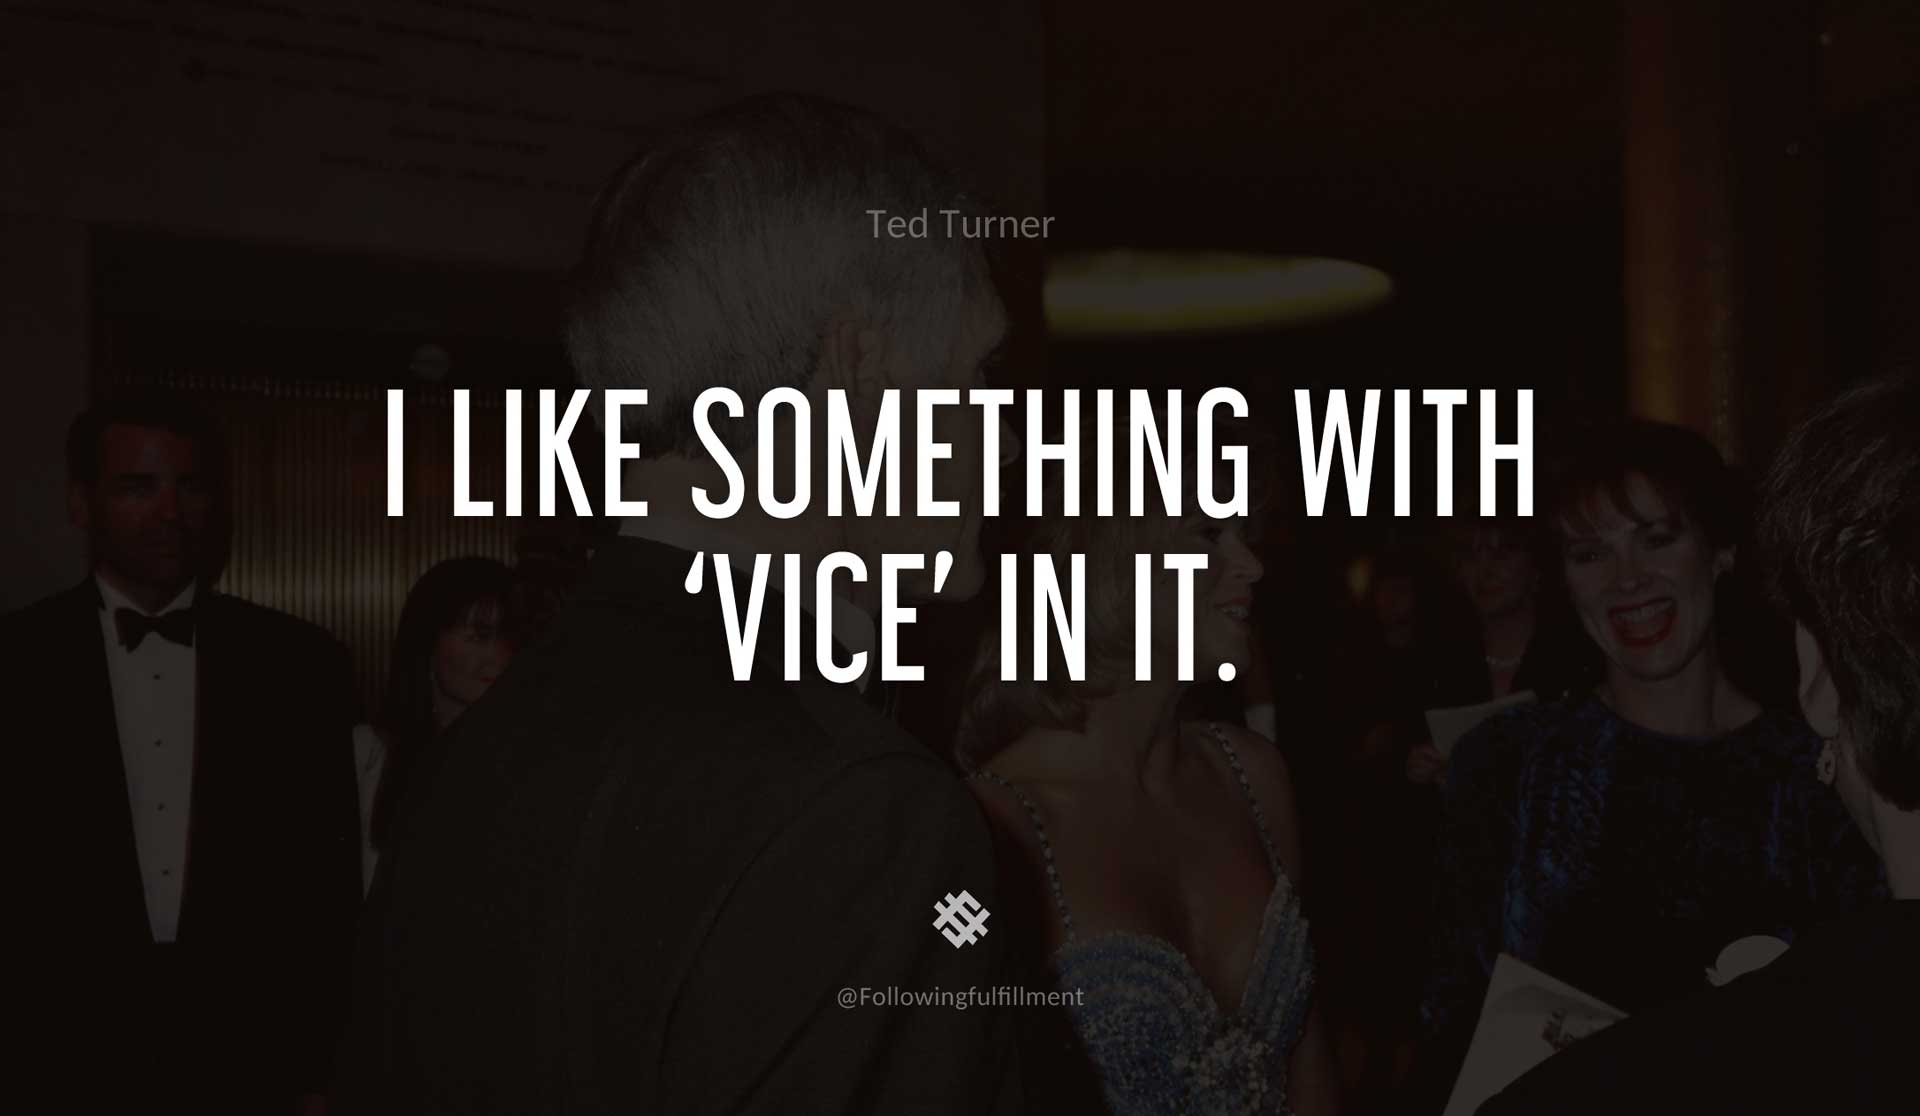 I-like-something-with-'vice'-in-it.-TED-TURNER-Quote.jpg